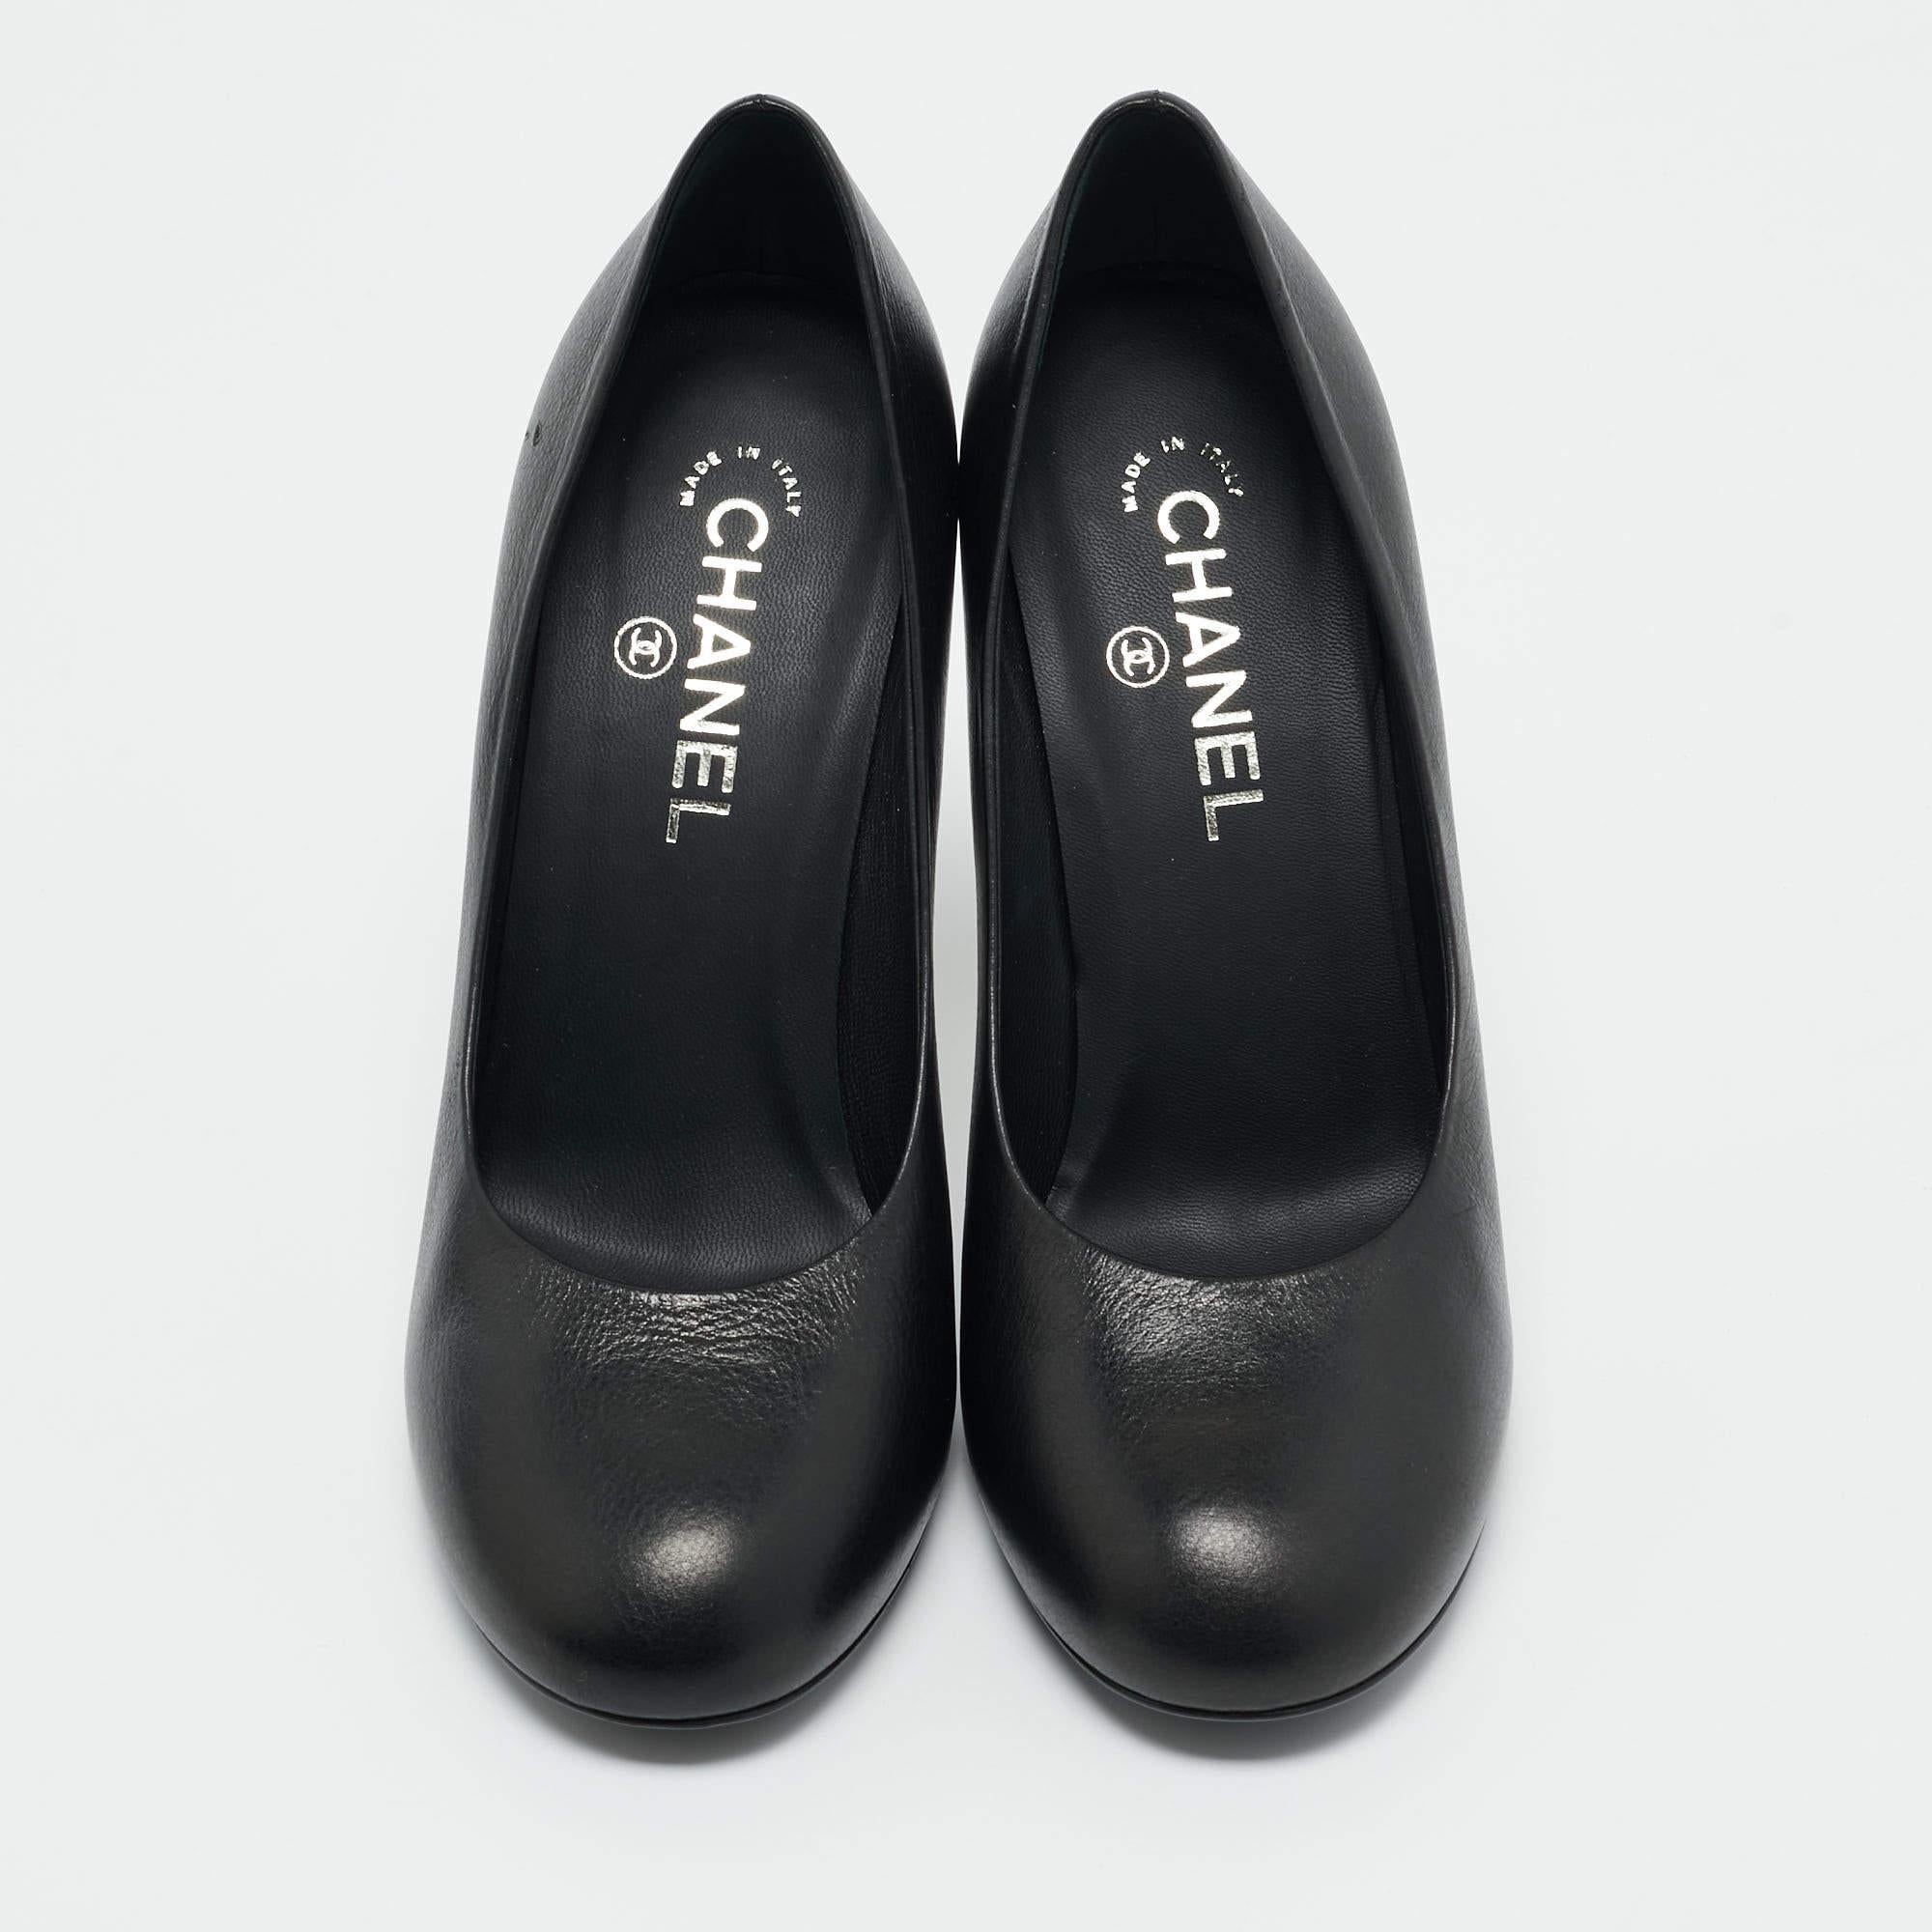 In a magical blend of luxury and elegance, these pumps come crafted from black leather and designed with round cap toes and the pearls on the heels add the perfect finishing touch to the pair.

Includes: Original Dustbag, Original Box, Info Booklet,